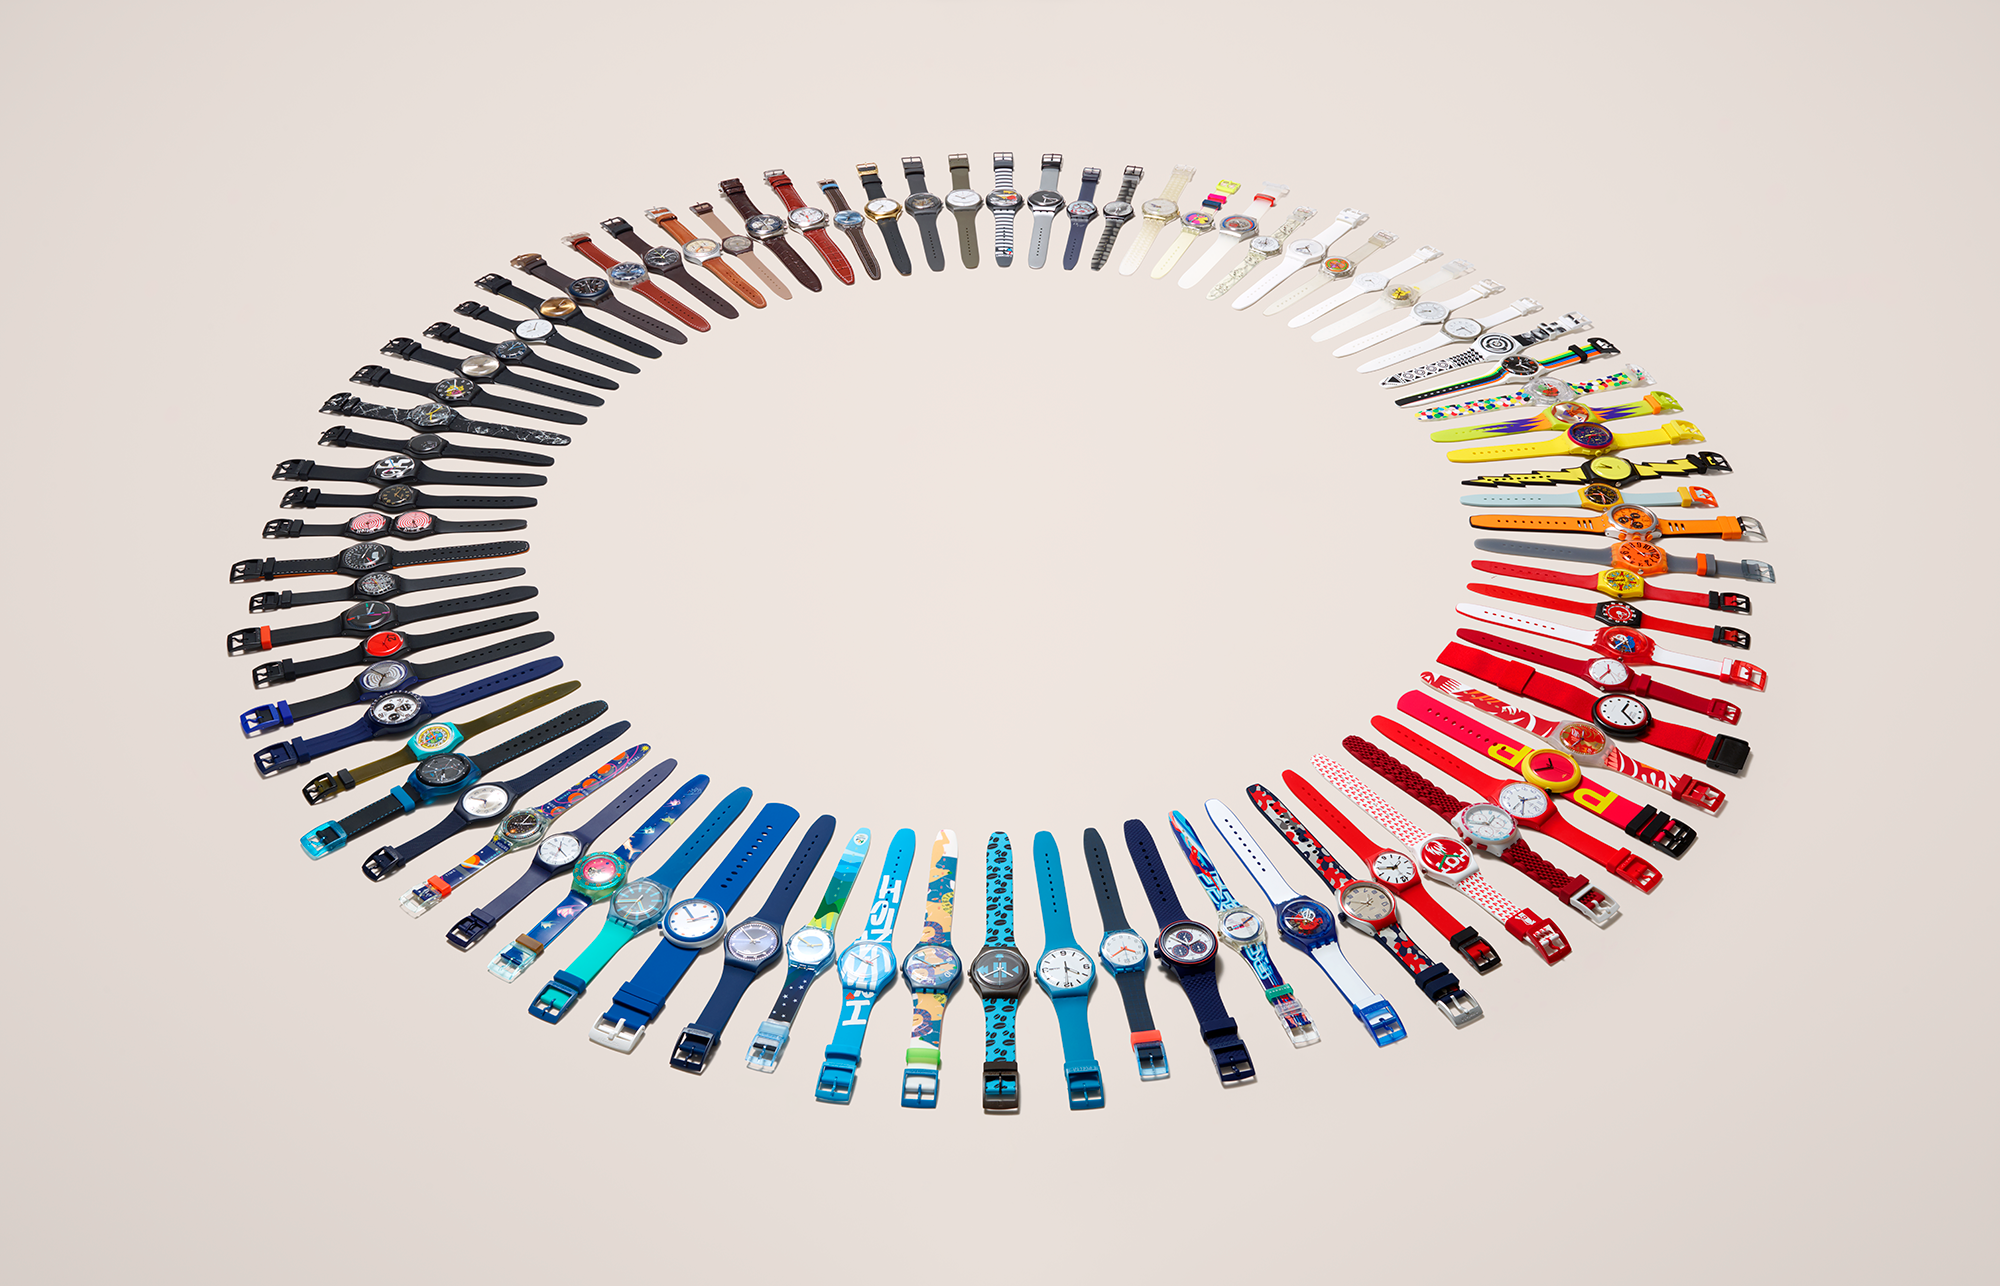 What watch brands does the Swatch group own, and how does the